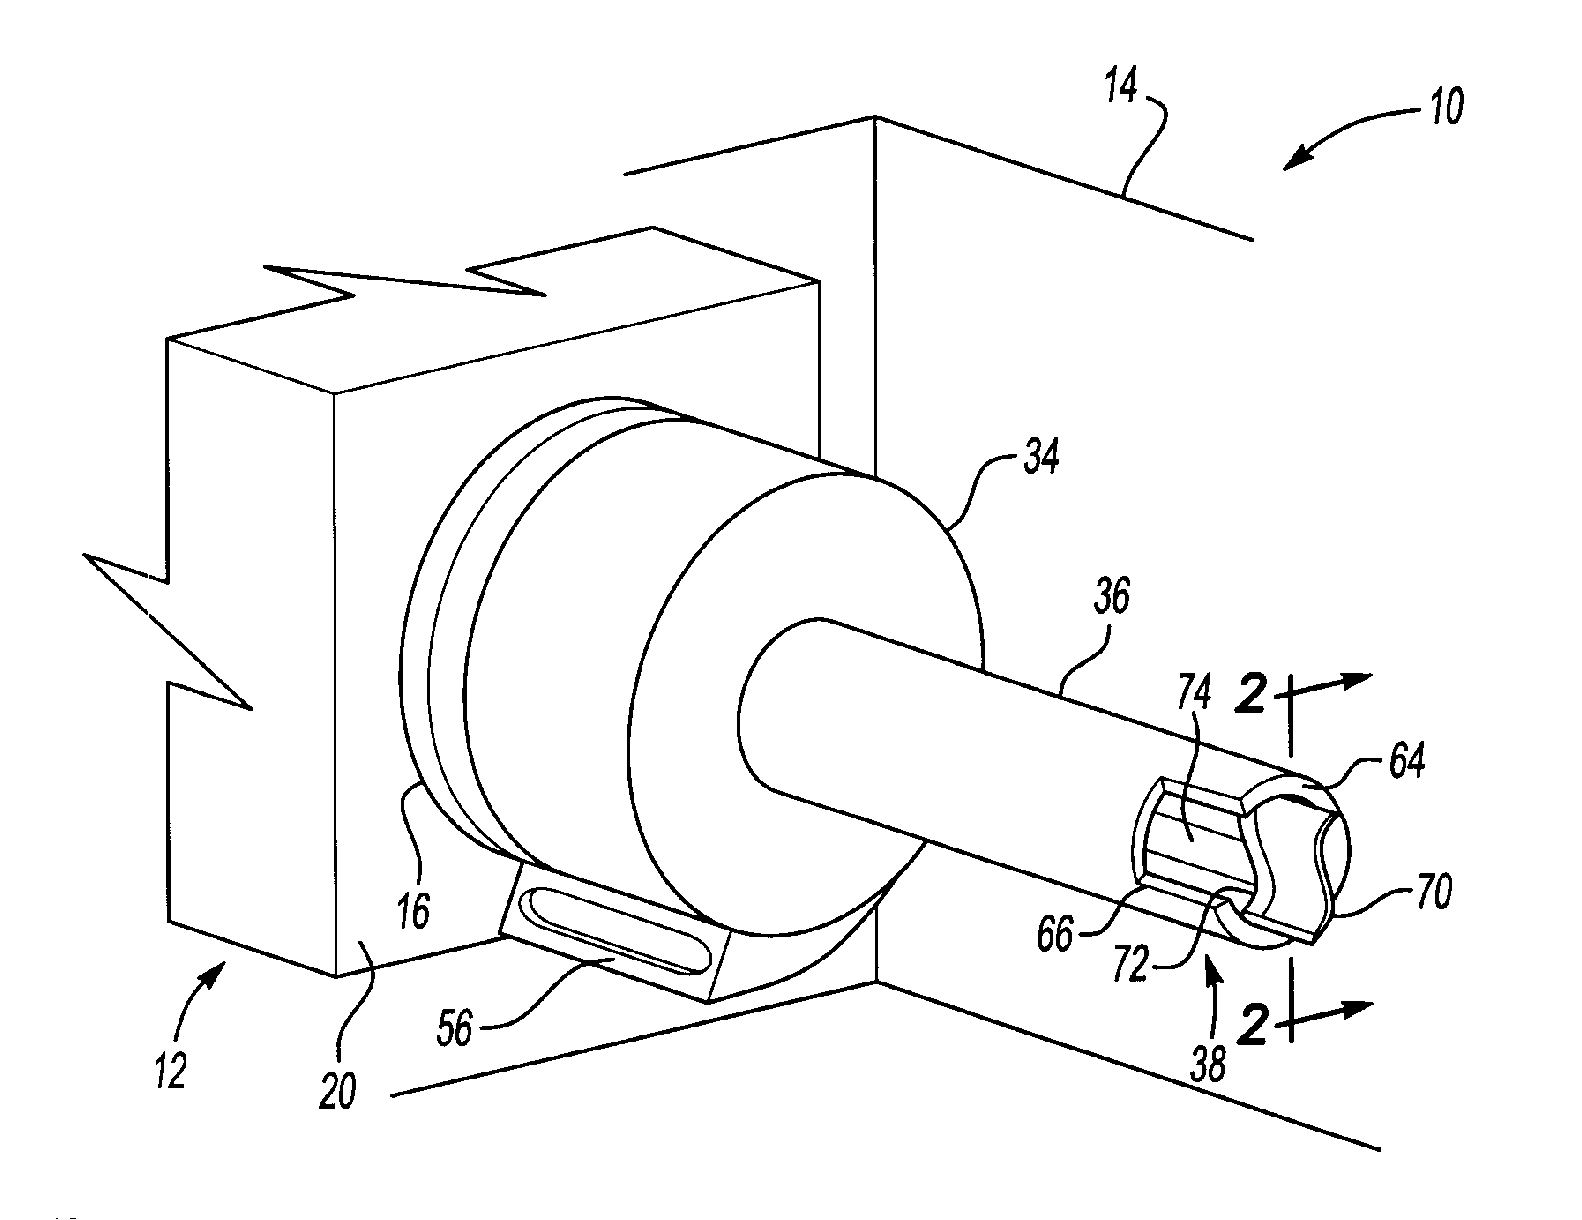 An apparatus for dislodging and removing contaminants from a surface of a machine tool